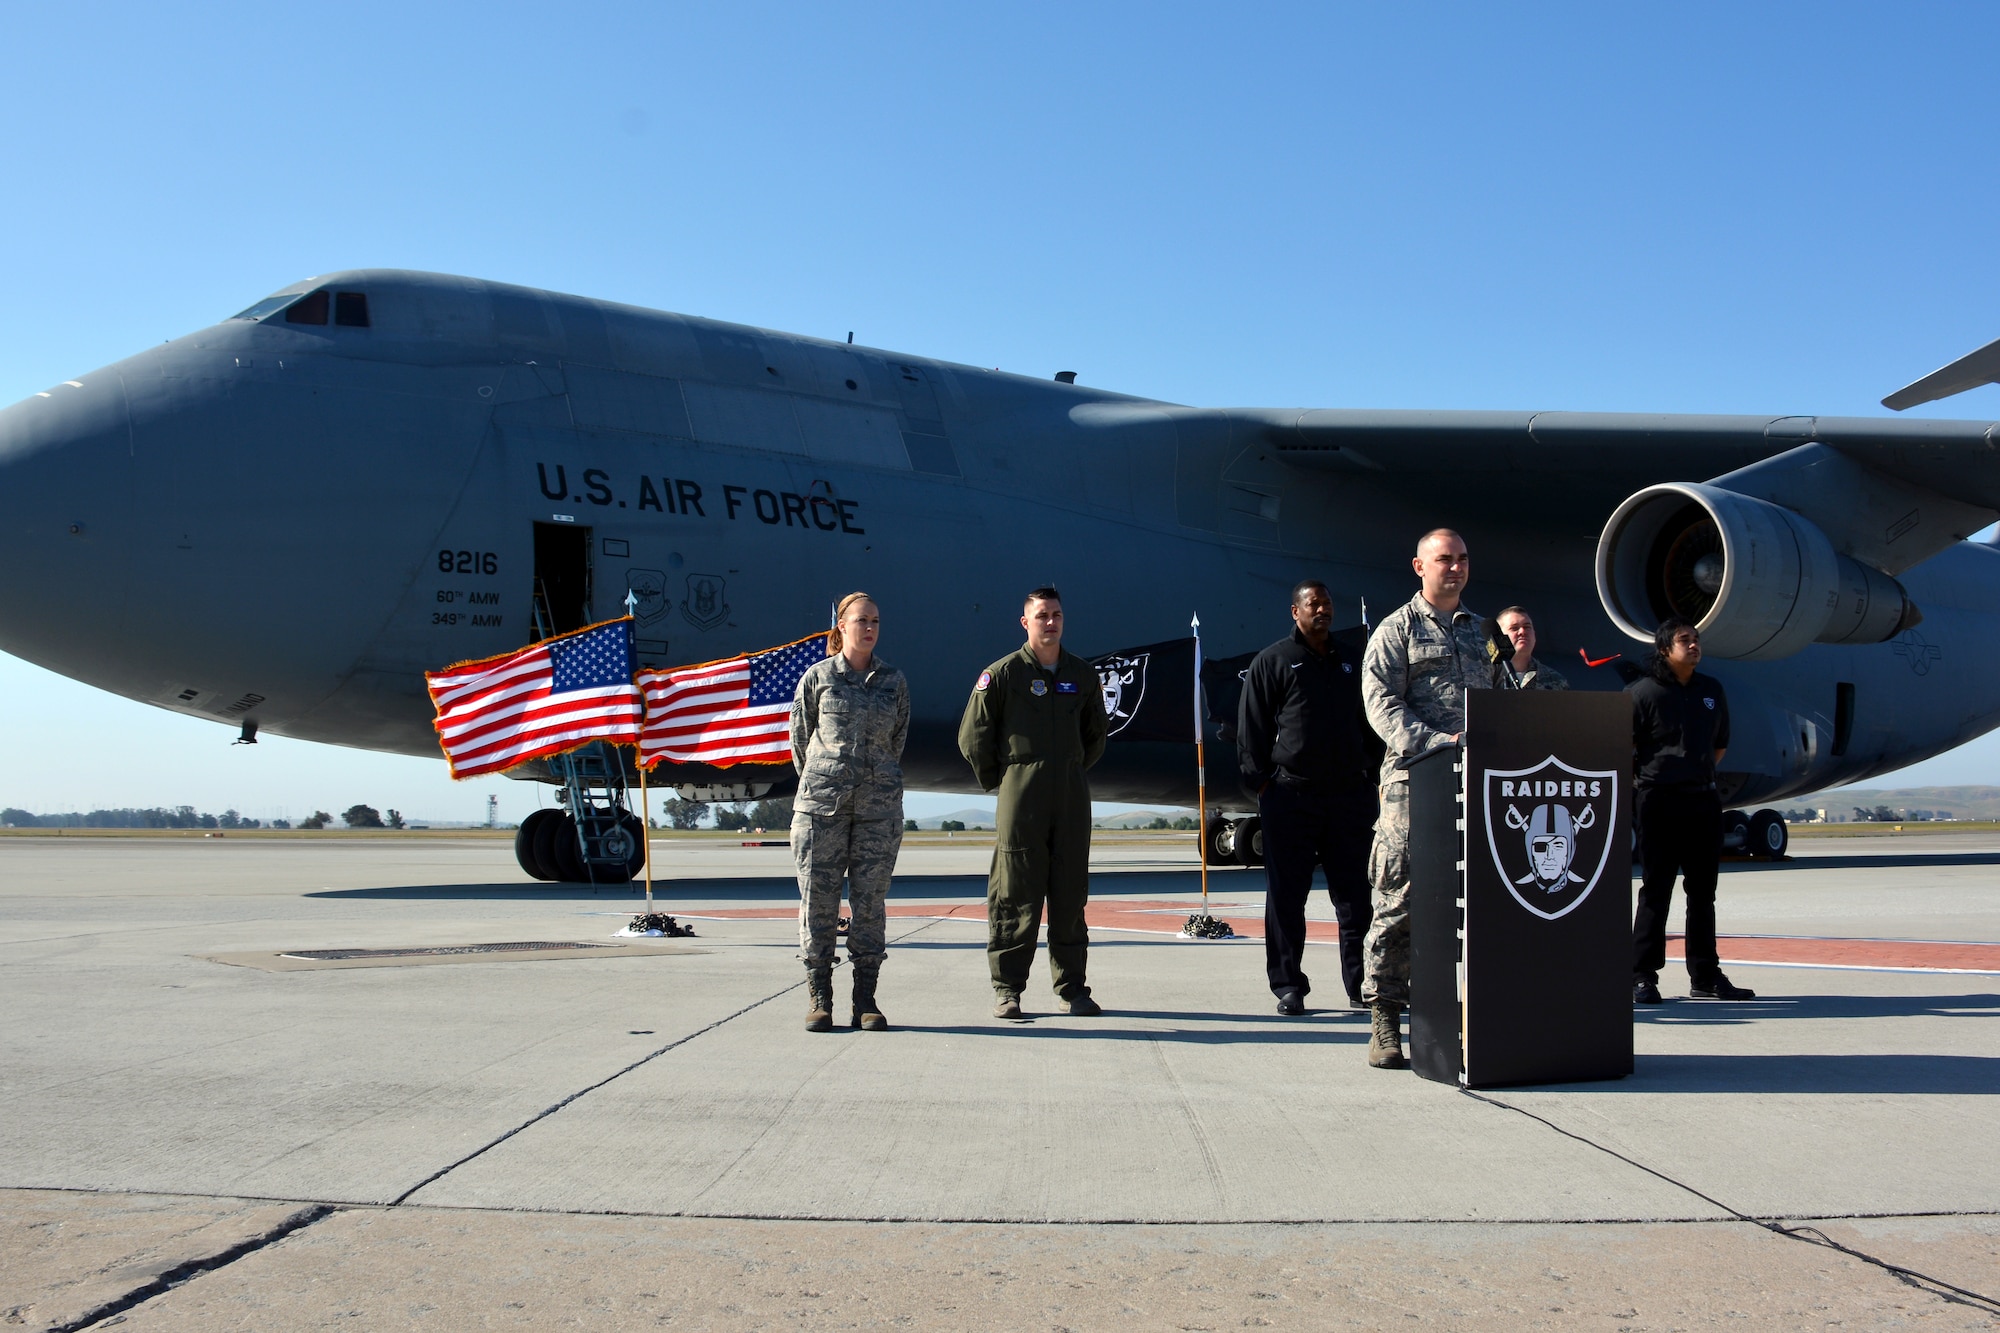 Senior Airman John Dunkel, 860th Aircraft Maintenance Squadron crew chief, prepares to announce the 29th pick in the fourth round of the NFL Draft for the Oakland Raiders May 2, 2015, at Travis Air Force Base, California. Dunkel was born and raised in the local area and his family has been season ticket holders since was he 8 years old. (U.S. Air Force photo by Senior Airman Charles Rivezzo)